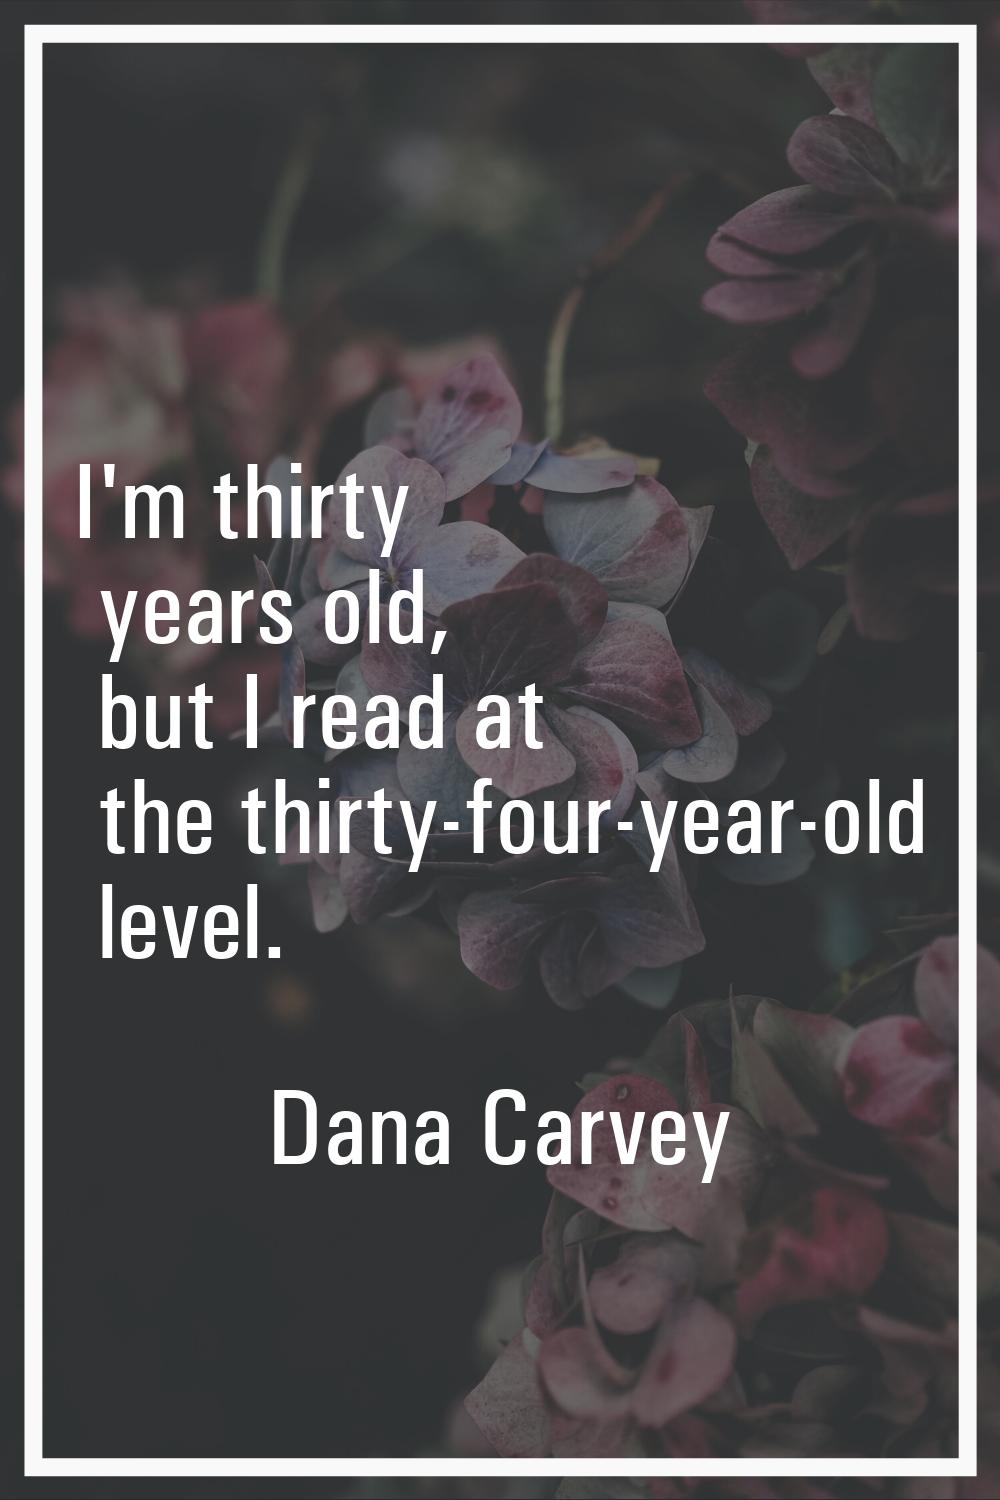 I'm thirty years old, but I read at the thirty-four-year-old level.